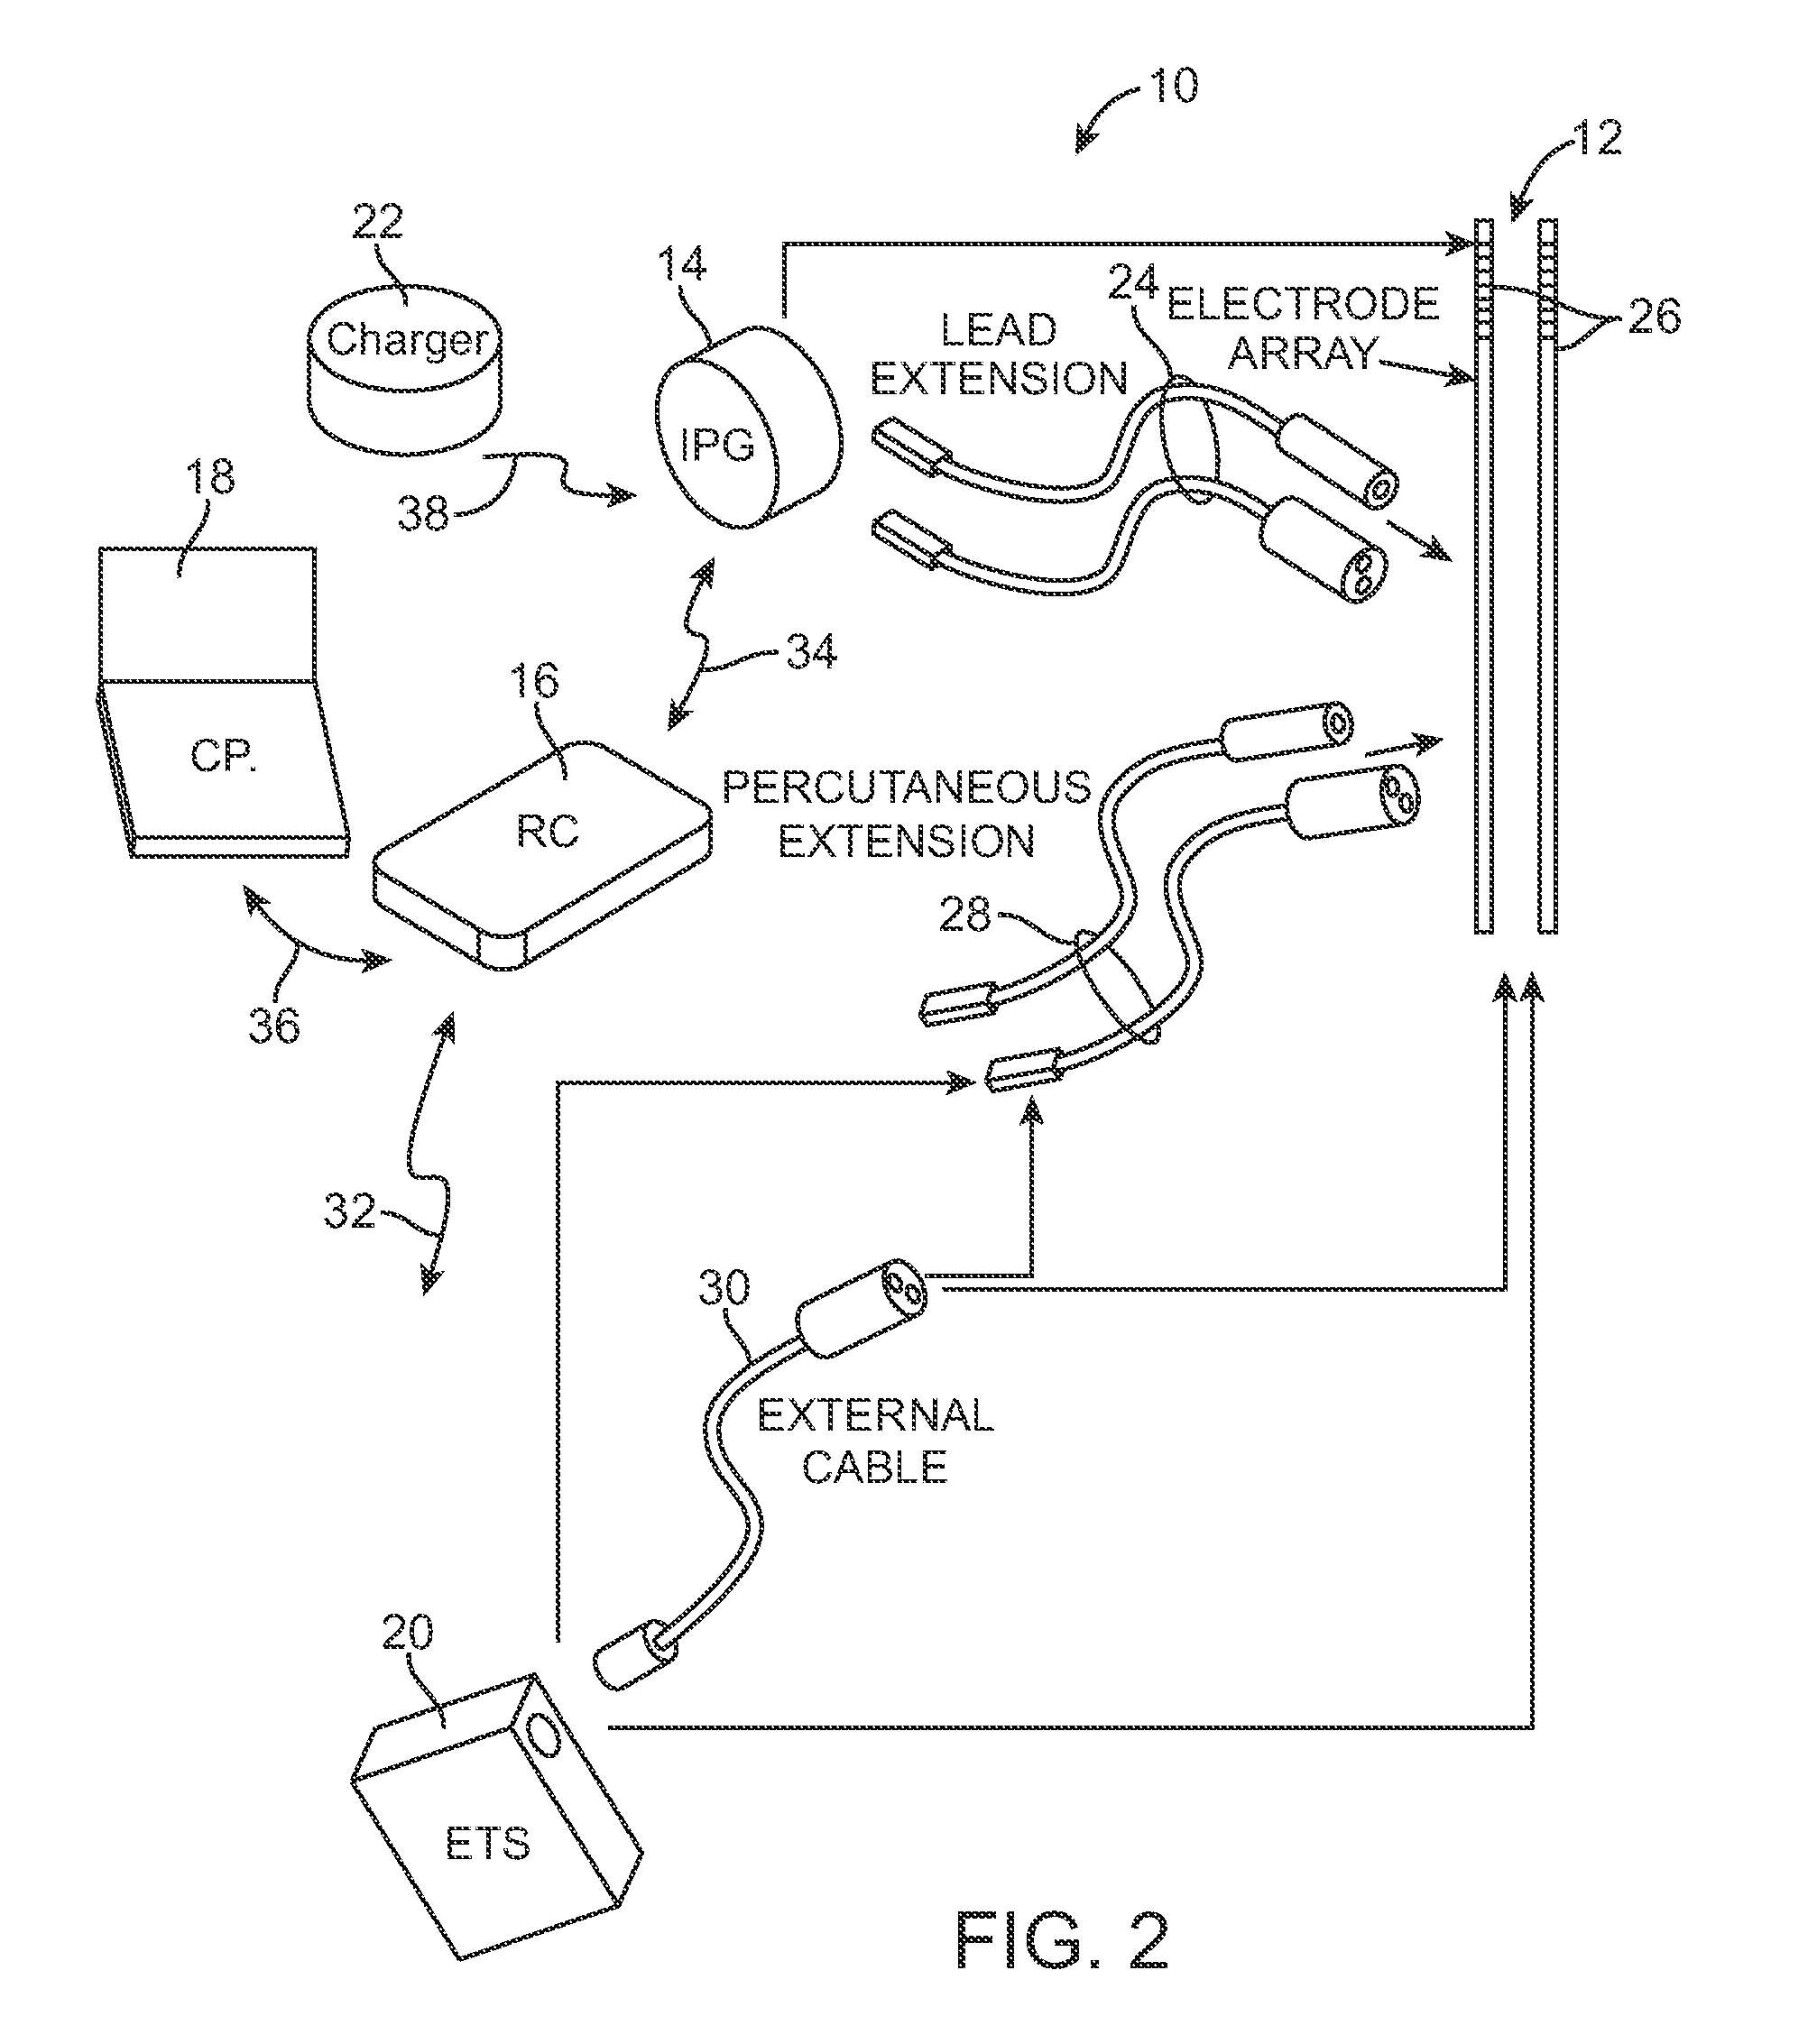 Methods to avoid frequency locking in a multi-channel neurostimulation system using pulse shifting